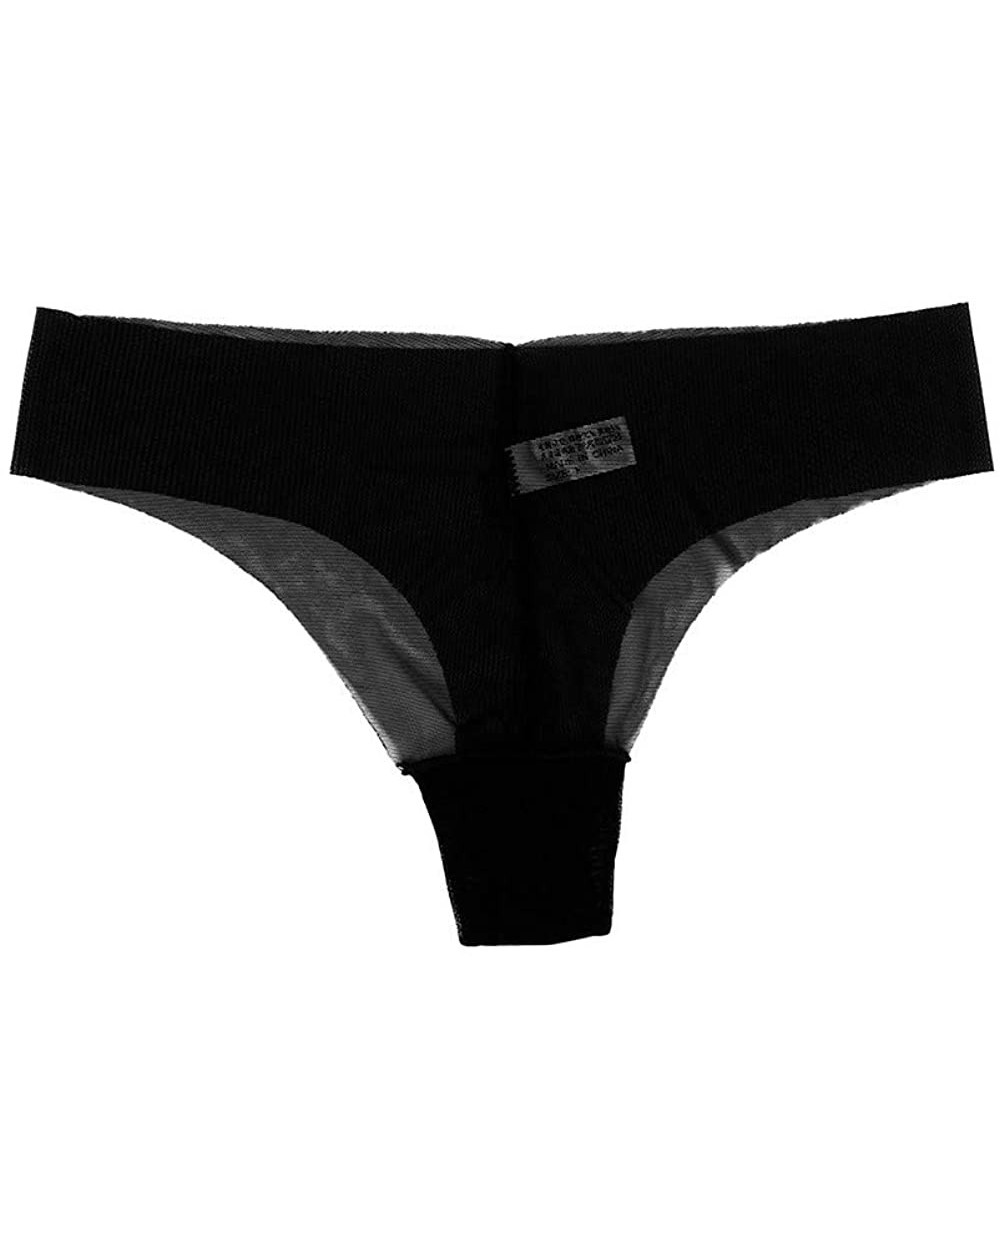 Low Rise No Show Thong Pantie-Women's Nylon Spandex Thong Underwear Power in Pink Pure Stretch Thong Underwear - Black - CH19...